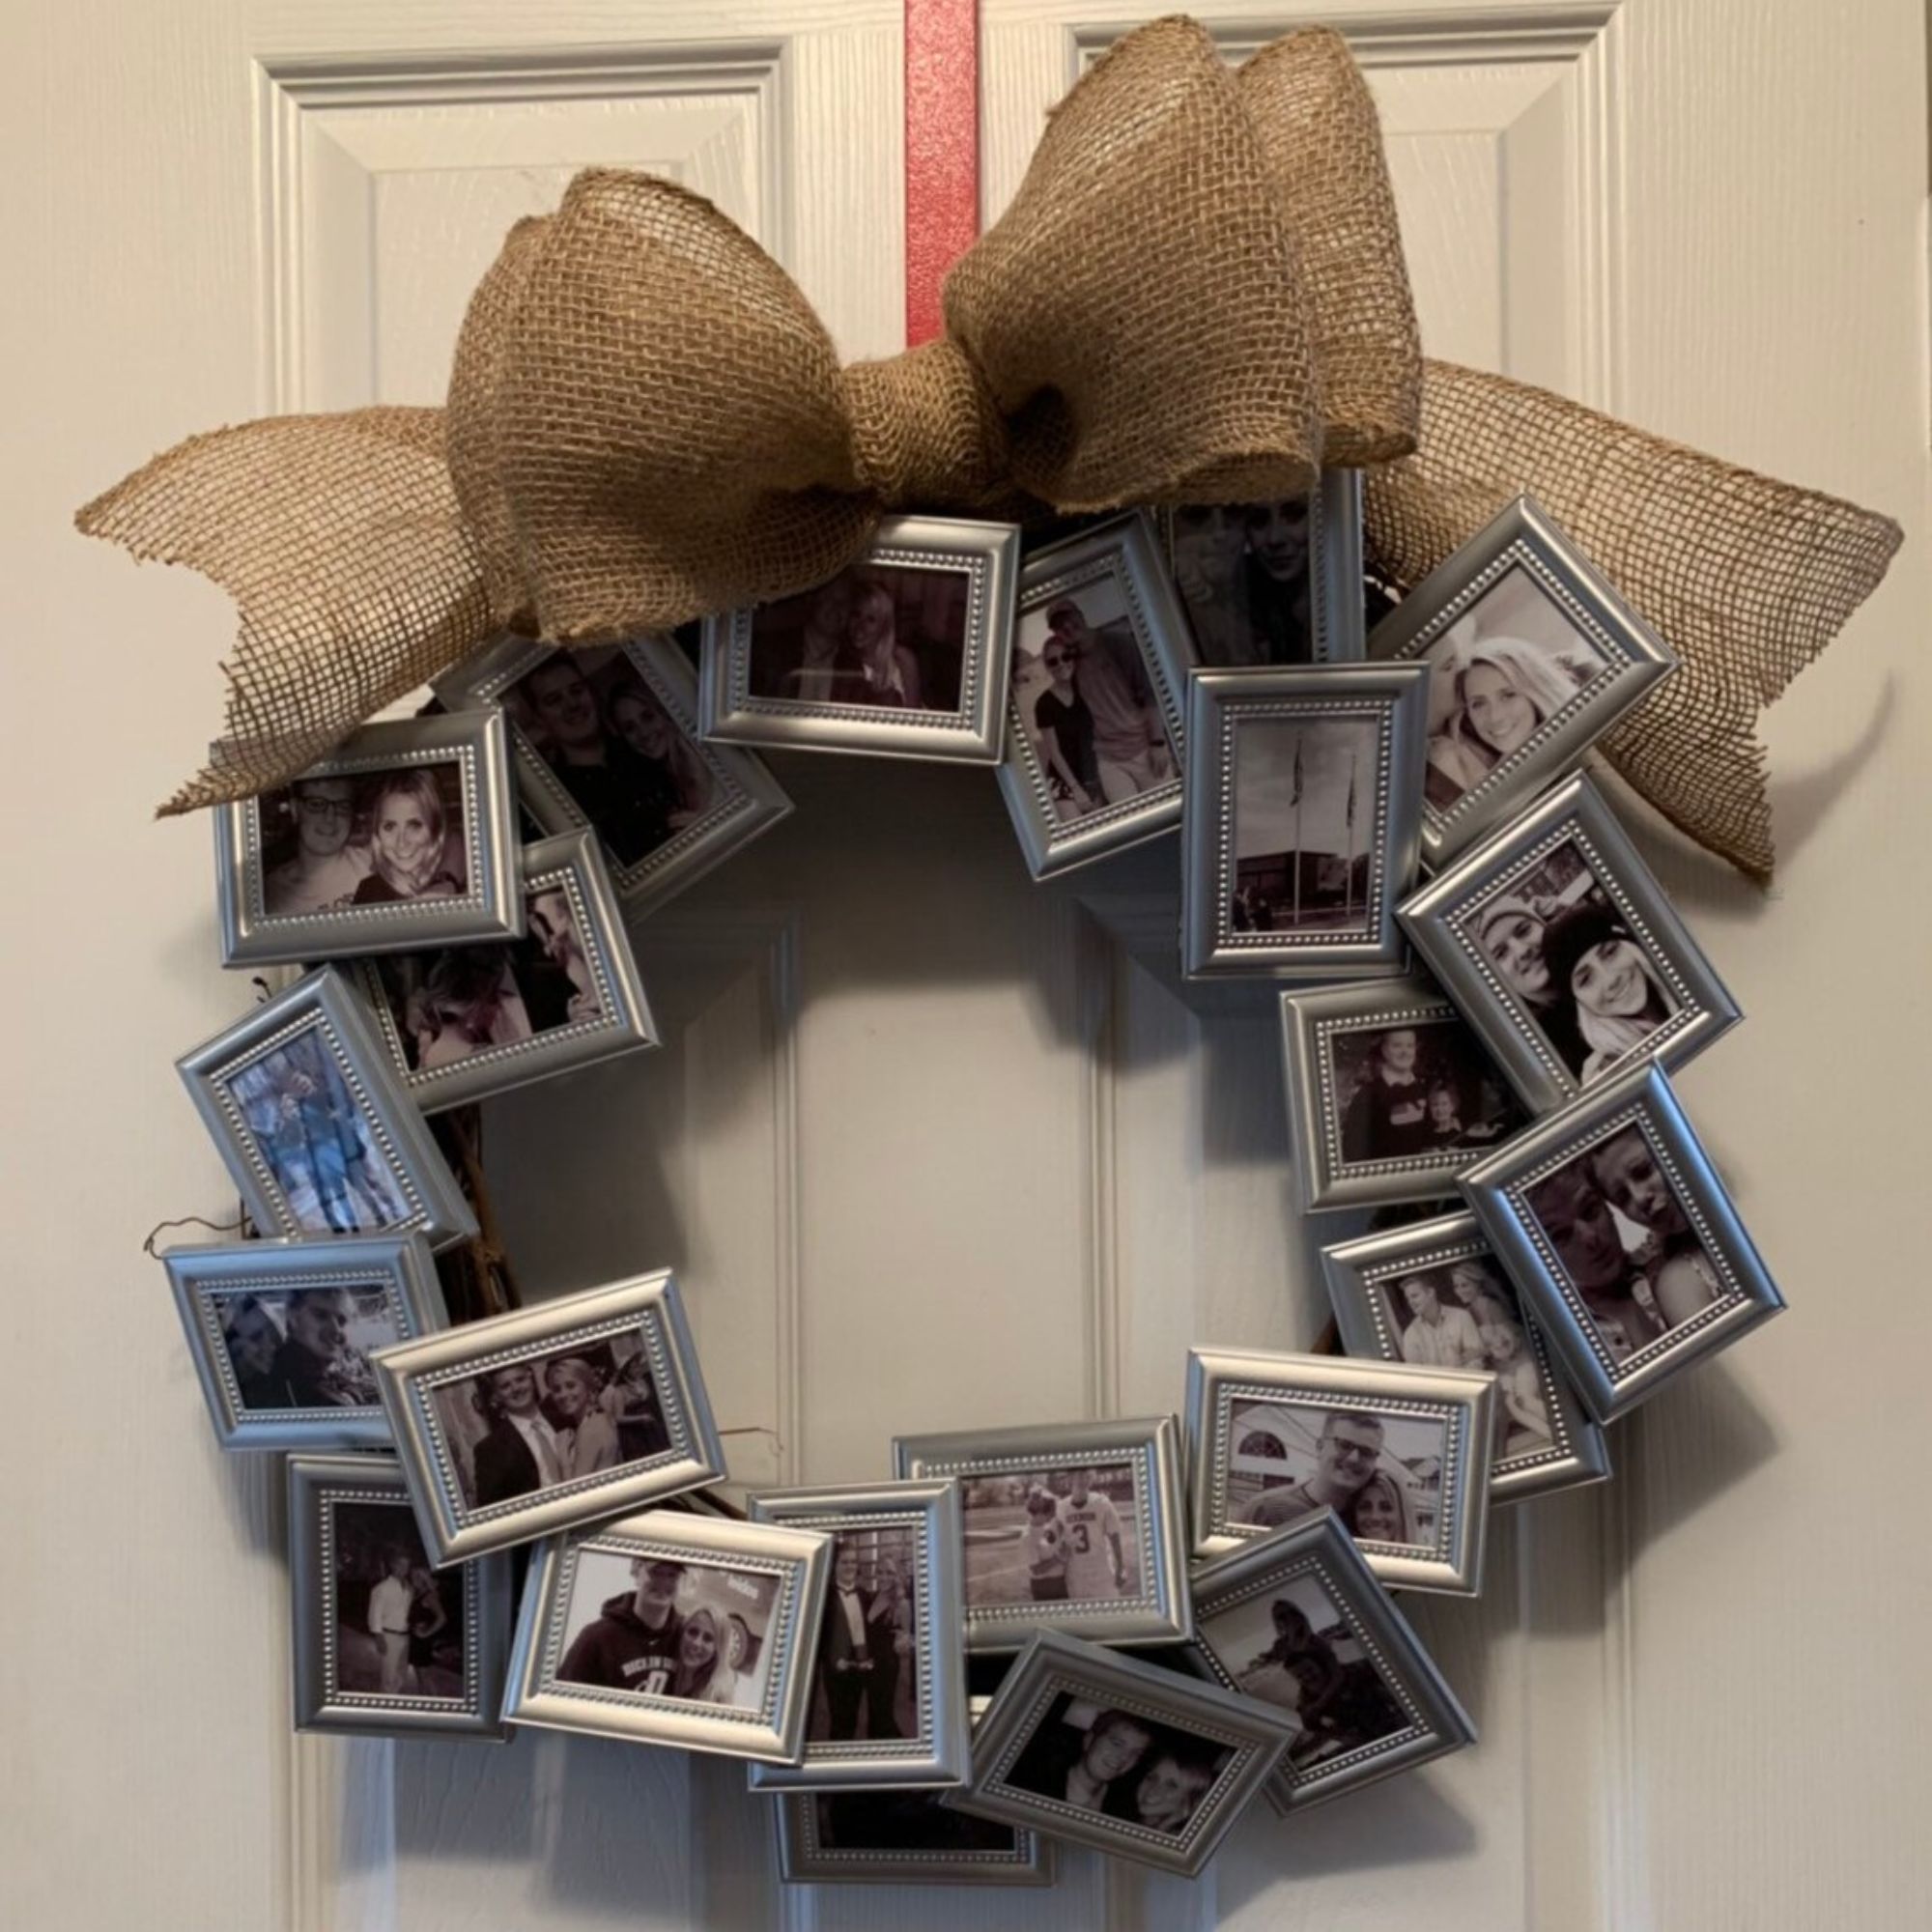 A christmas wreath crafted from photo frames